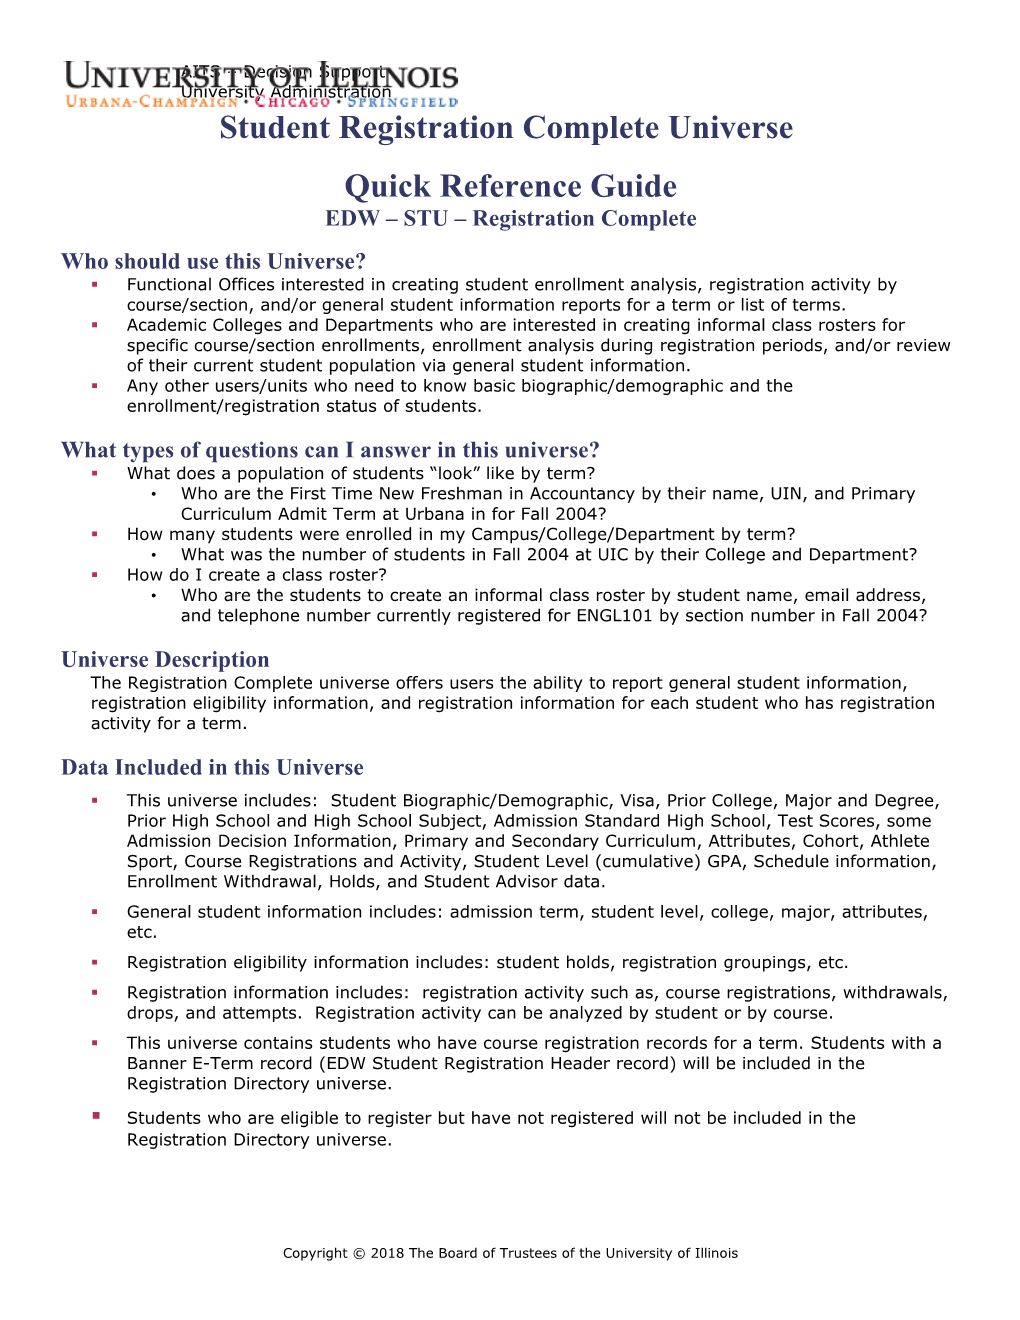 Quick Reference Guide EDW STU Registration Complete